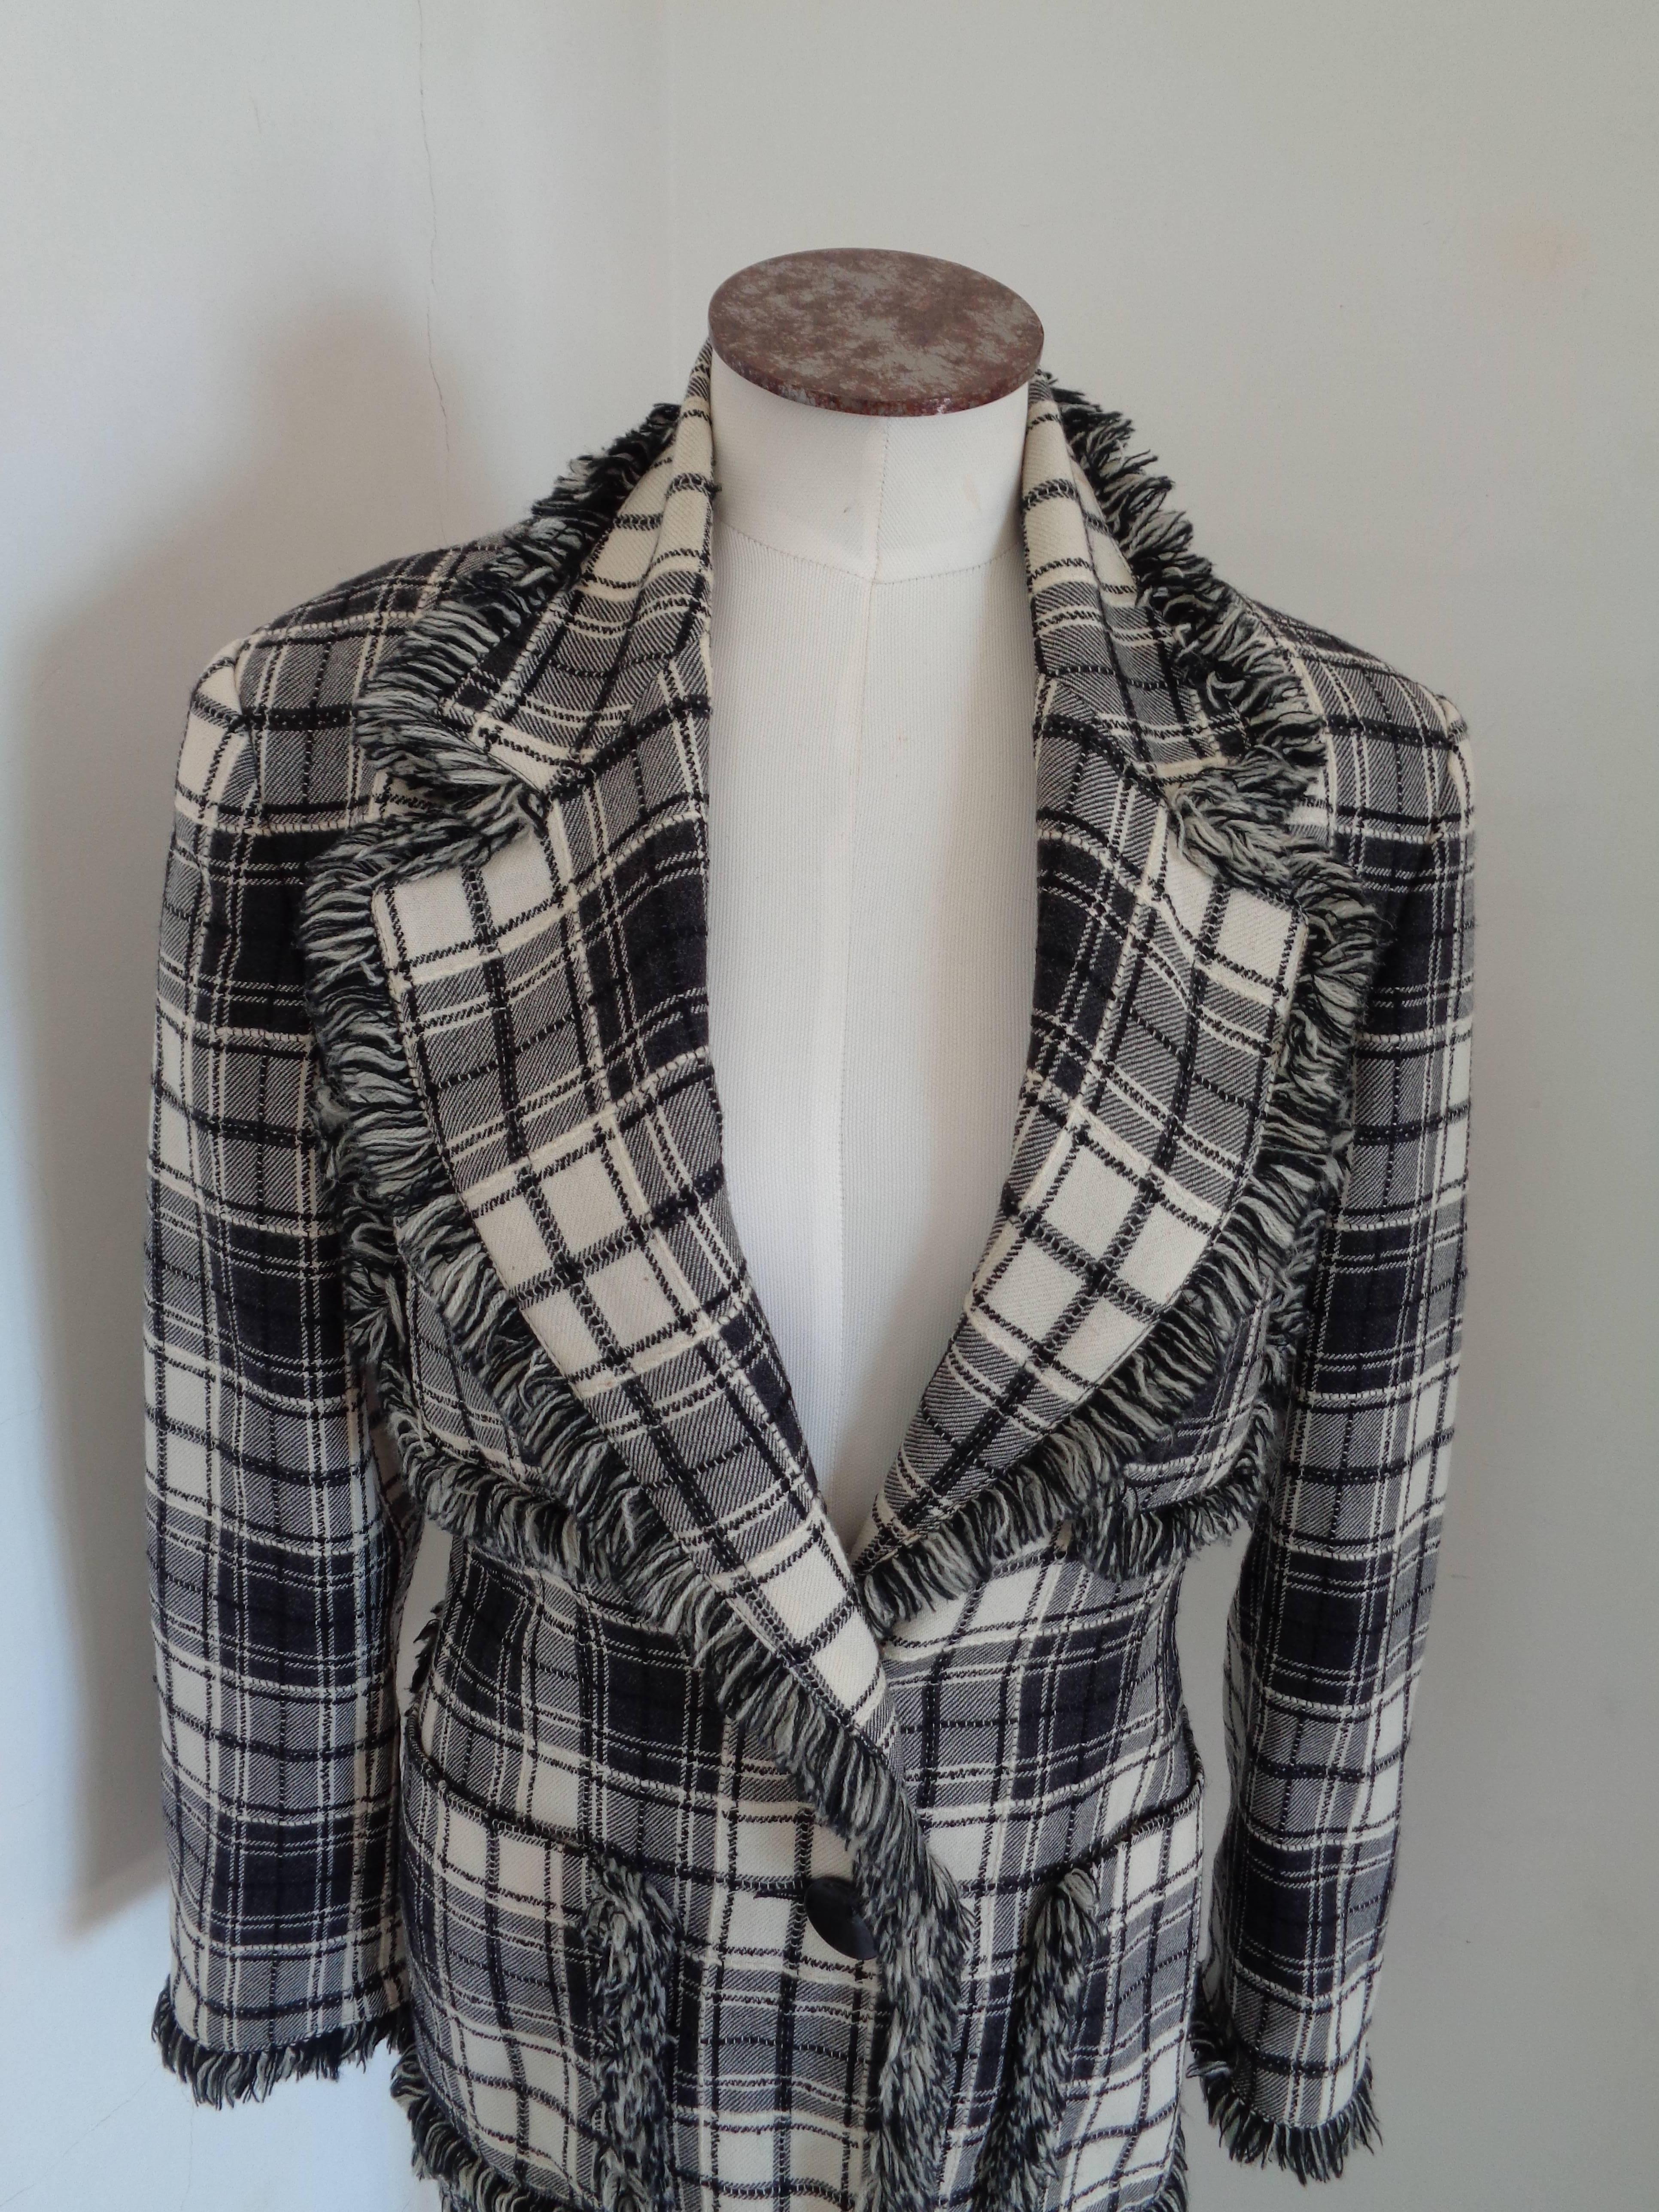 Oaks by Gianfranco Ferre Black & White Jacket

Totally made in italy in size 40

Composition: Wool

